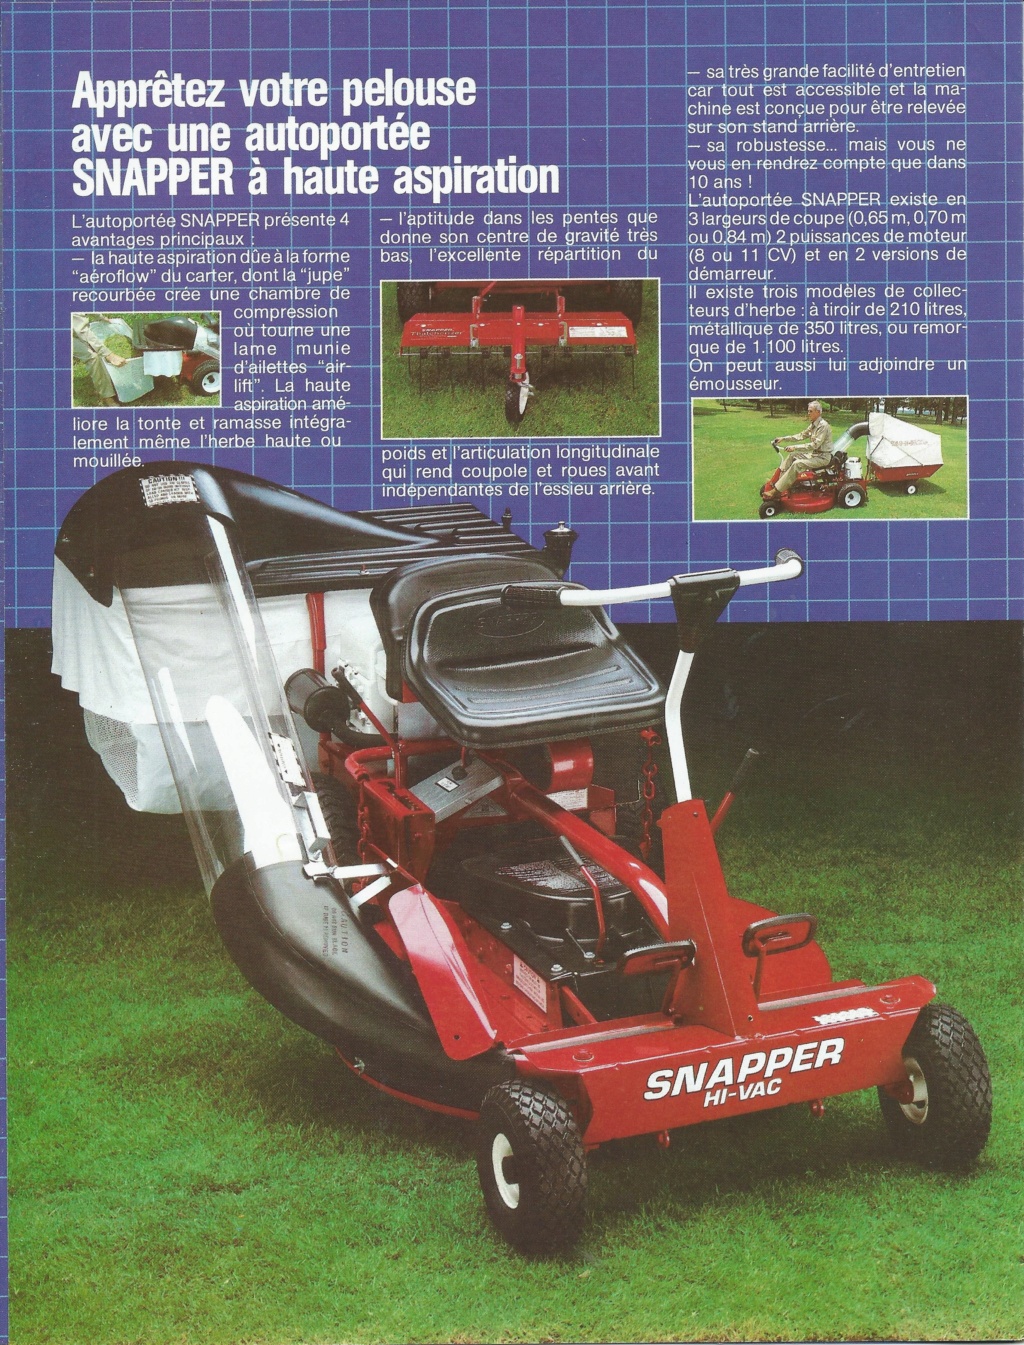 SNAPPER... des autoportées made in USA Snappe11